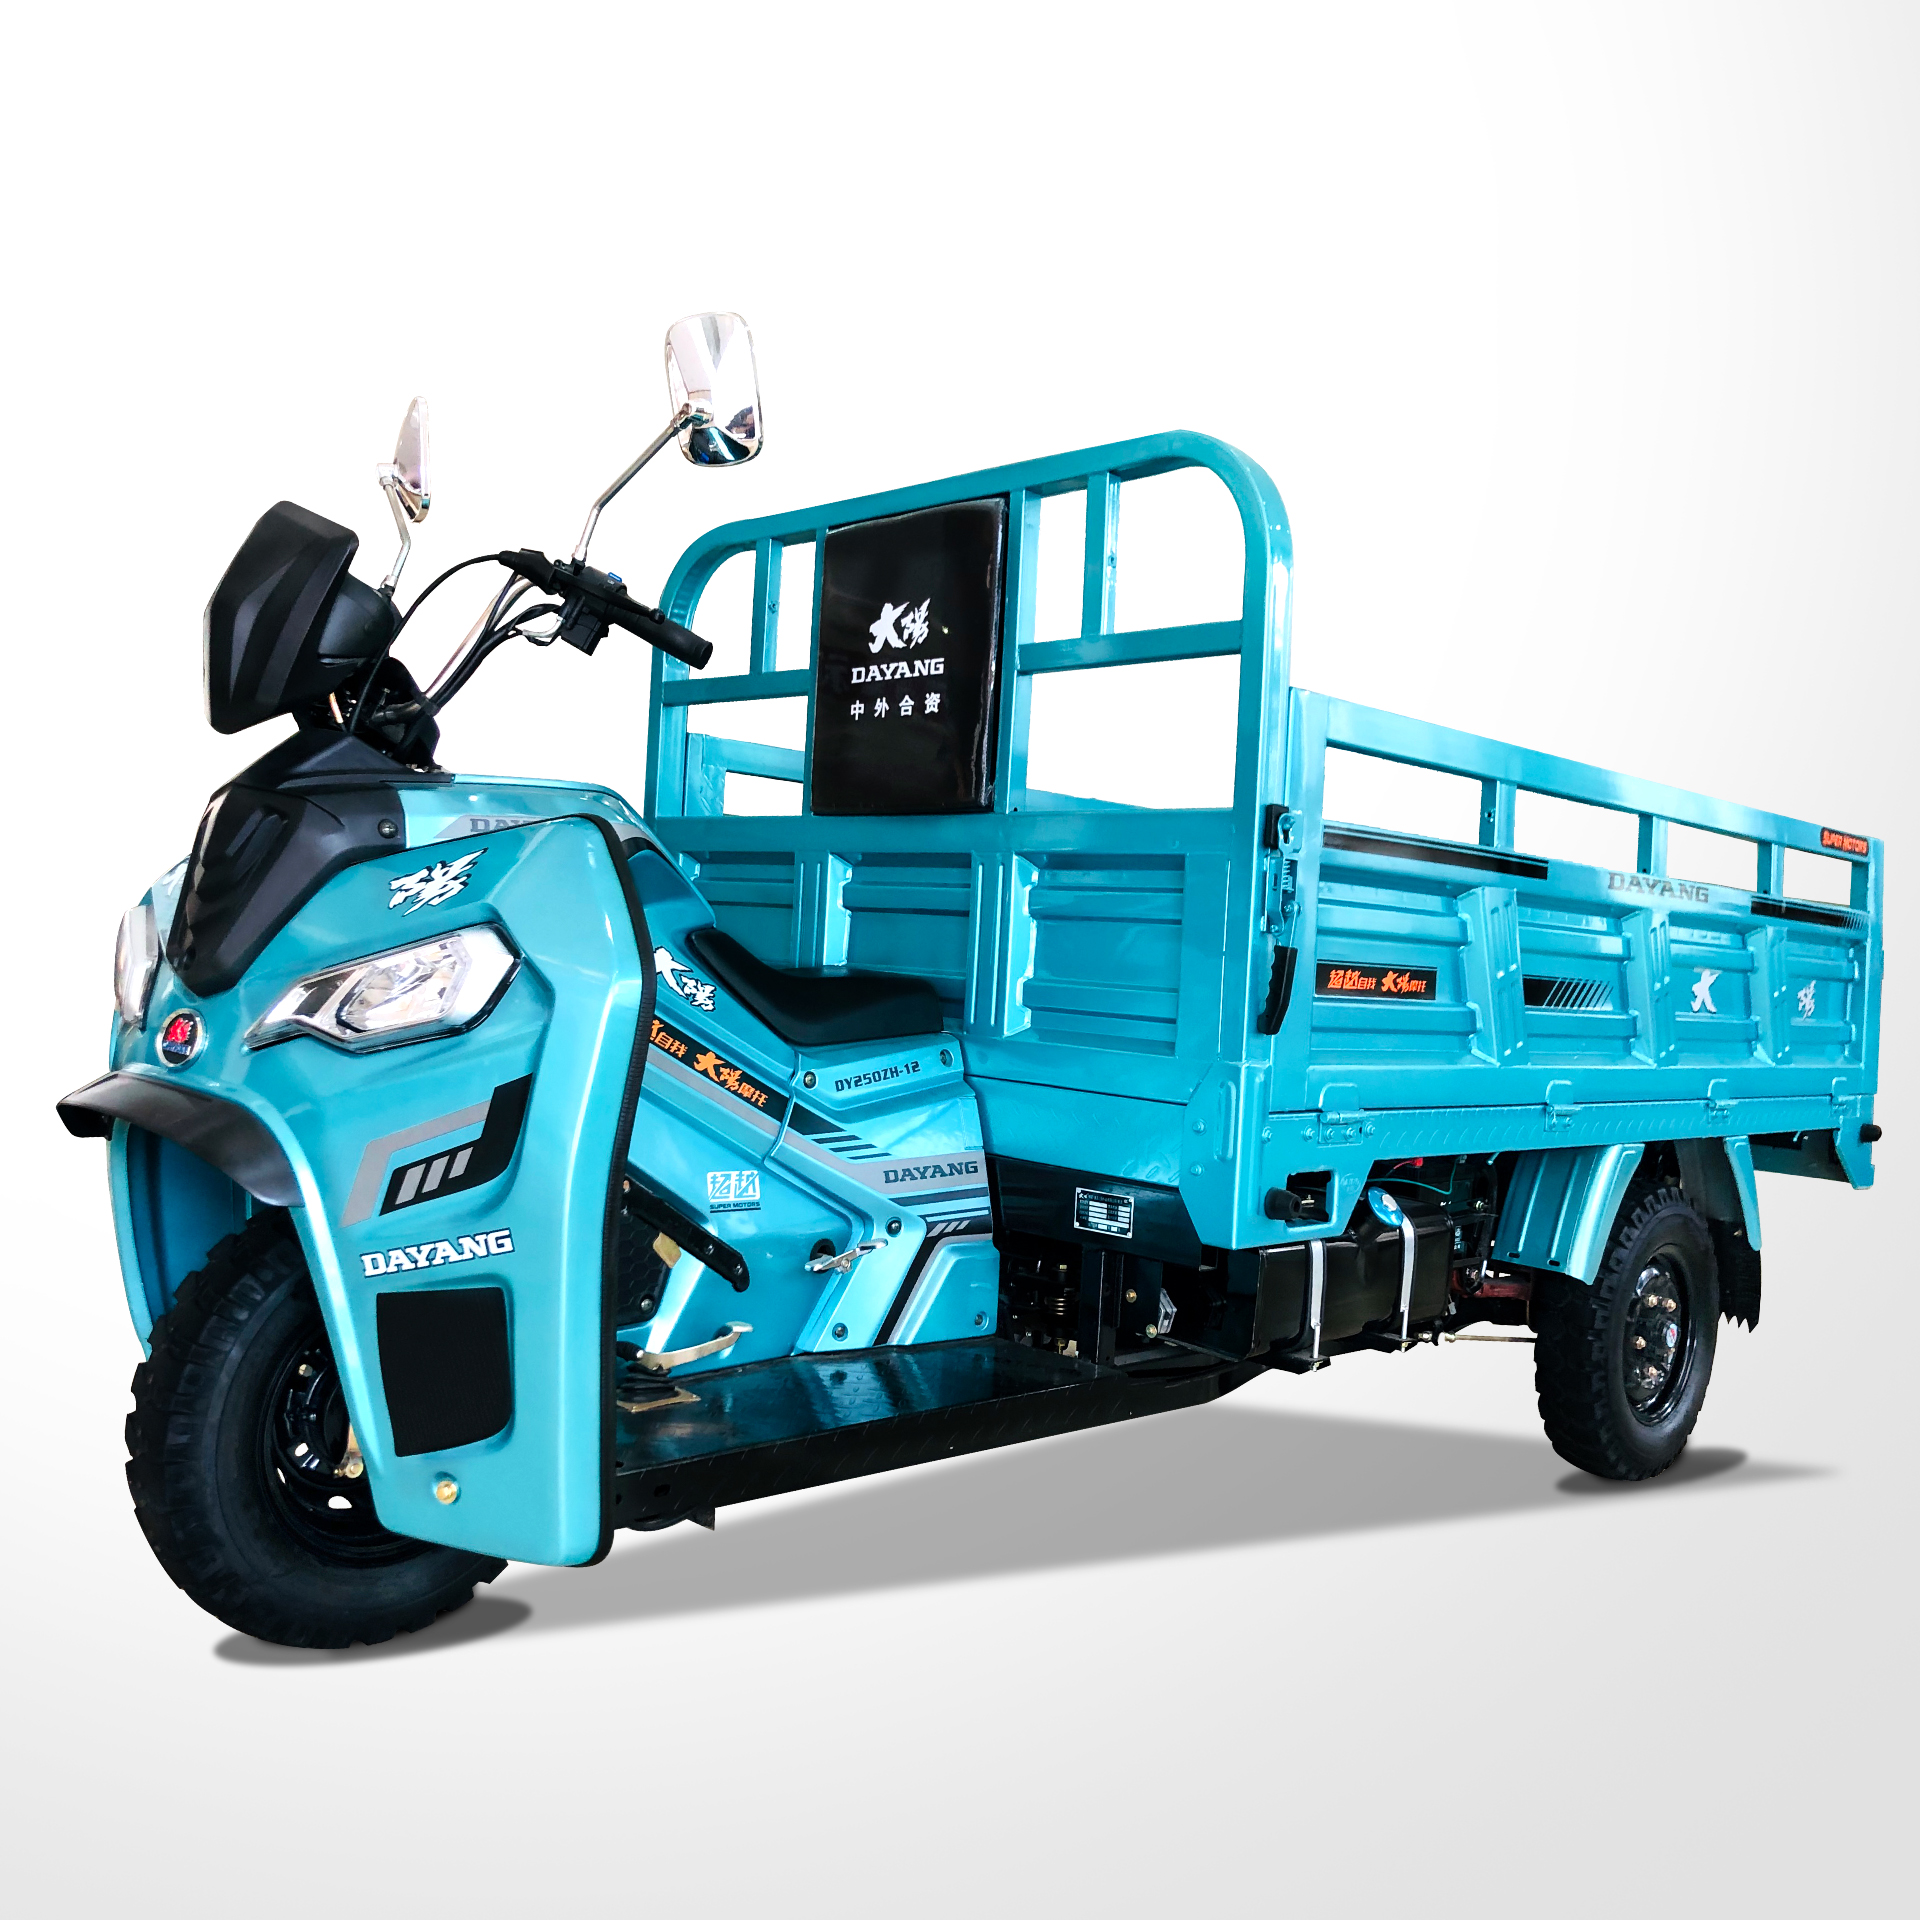 M1 200cc/250cc/300cc cargo tricycle for selling